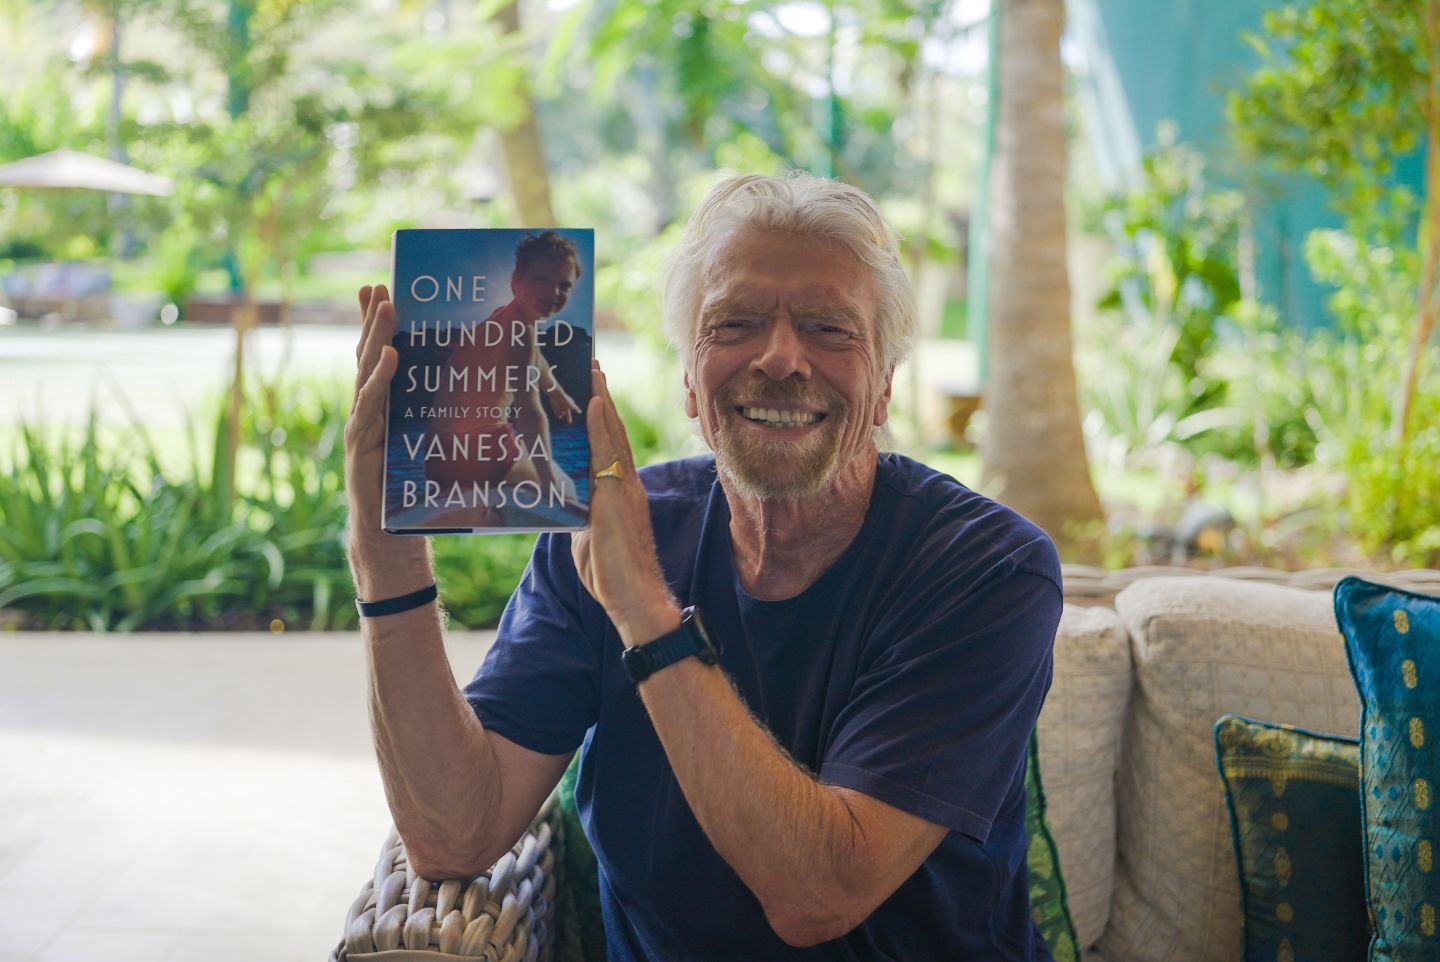 Richard Branson smiles while holding up One Hundred Summers - a book by Vanessa Branson